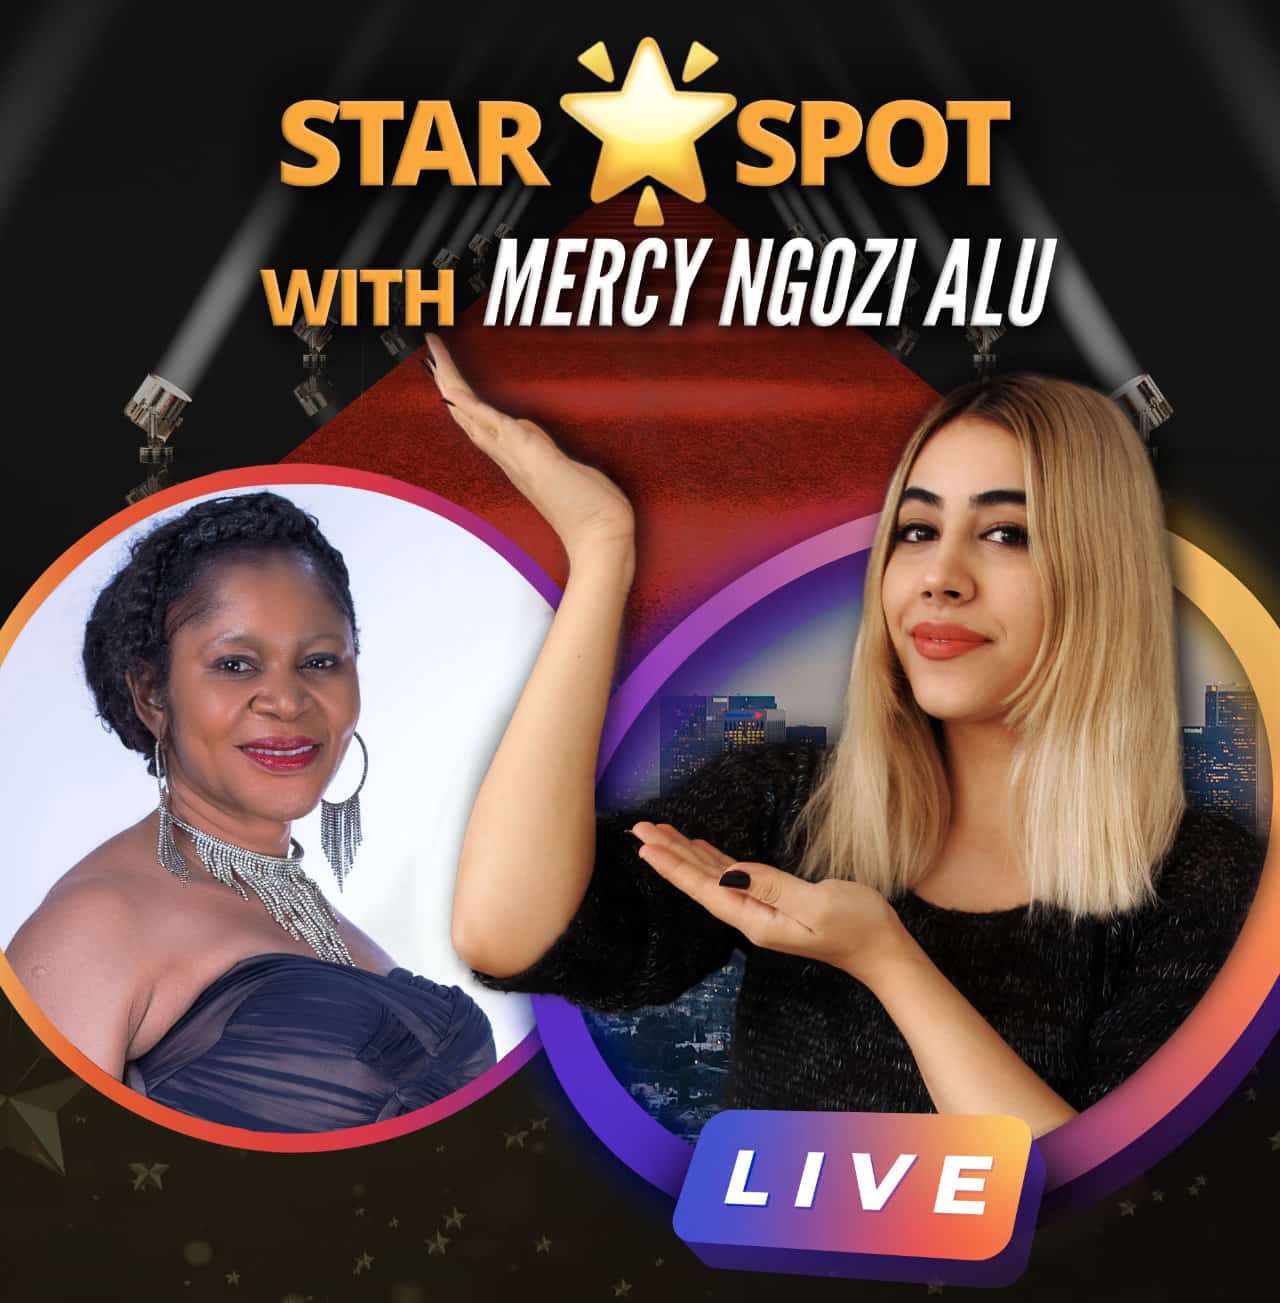 Promotional cover art of Star Spot with Mercy Alu